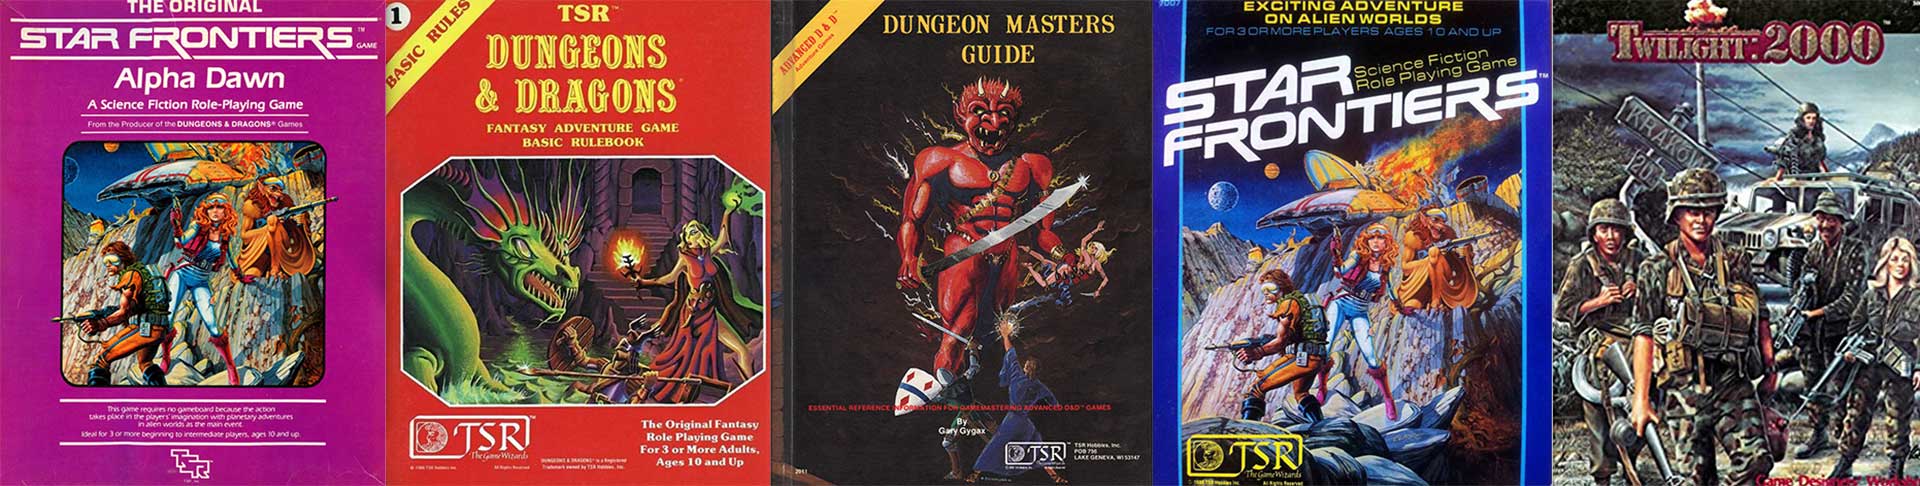 Cover art for: Star Frontiers Alpha Dawn, D&D Basic Set, Dungeon Masters Guide 1E, Original Star Frontiers